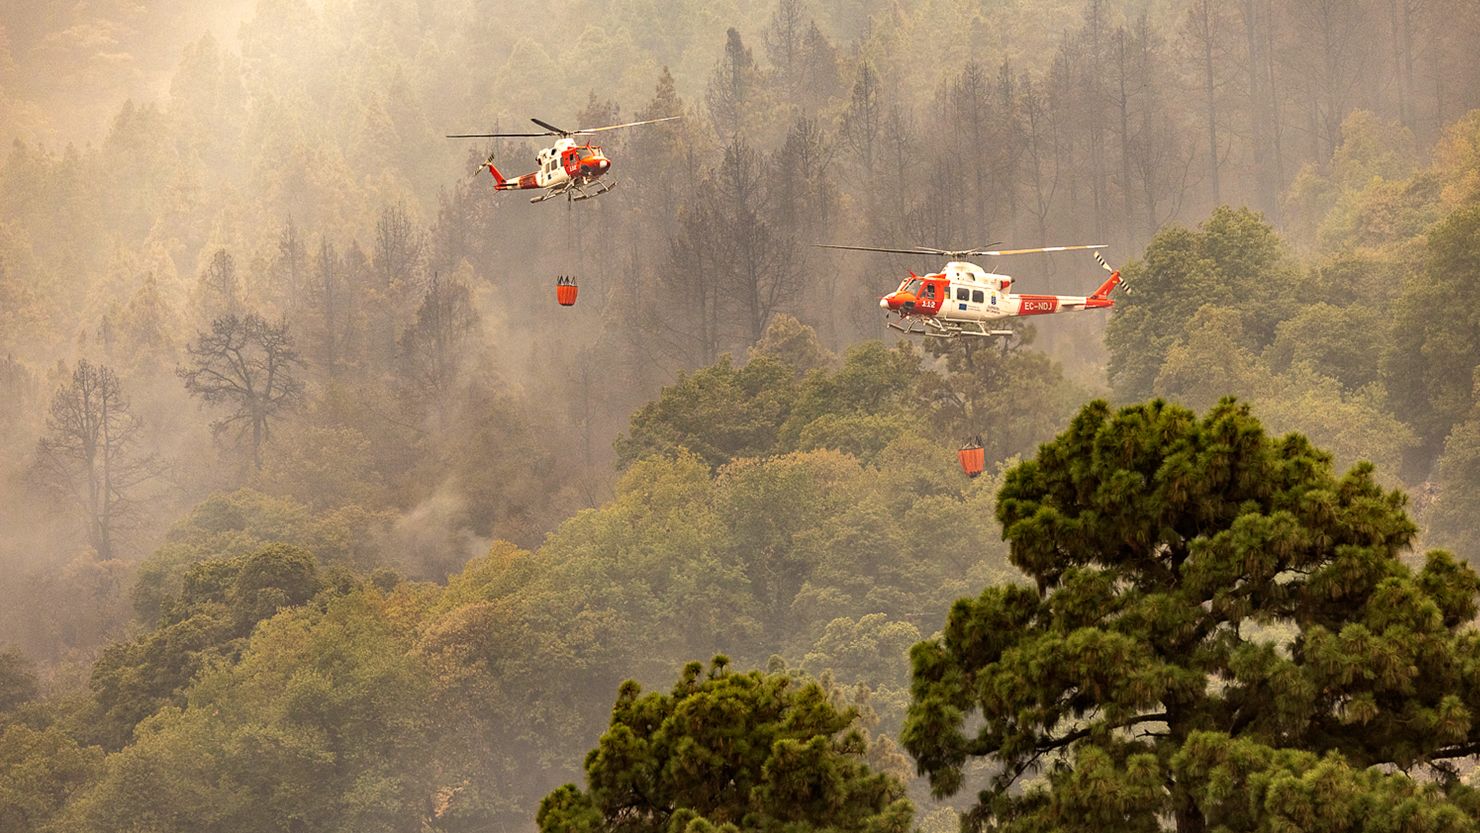 Hydroplanes work on extinguishing forest fire on Saturday in La Orotava, Tenerife, Canary Islands, Spain. 